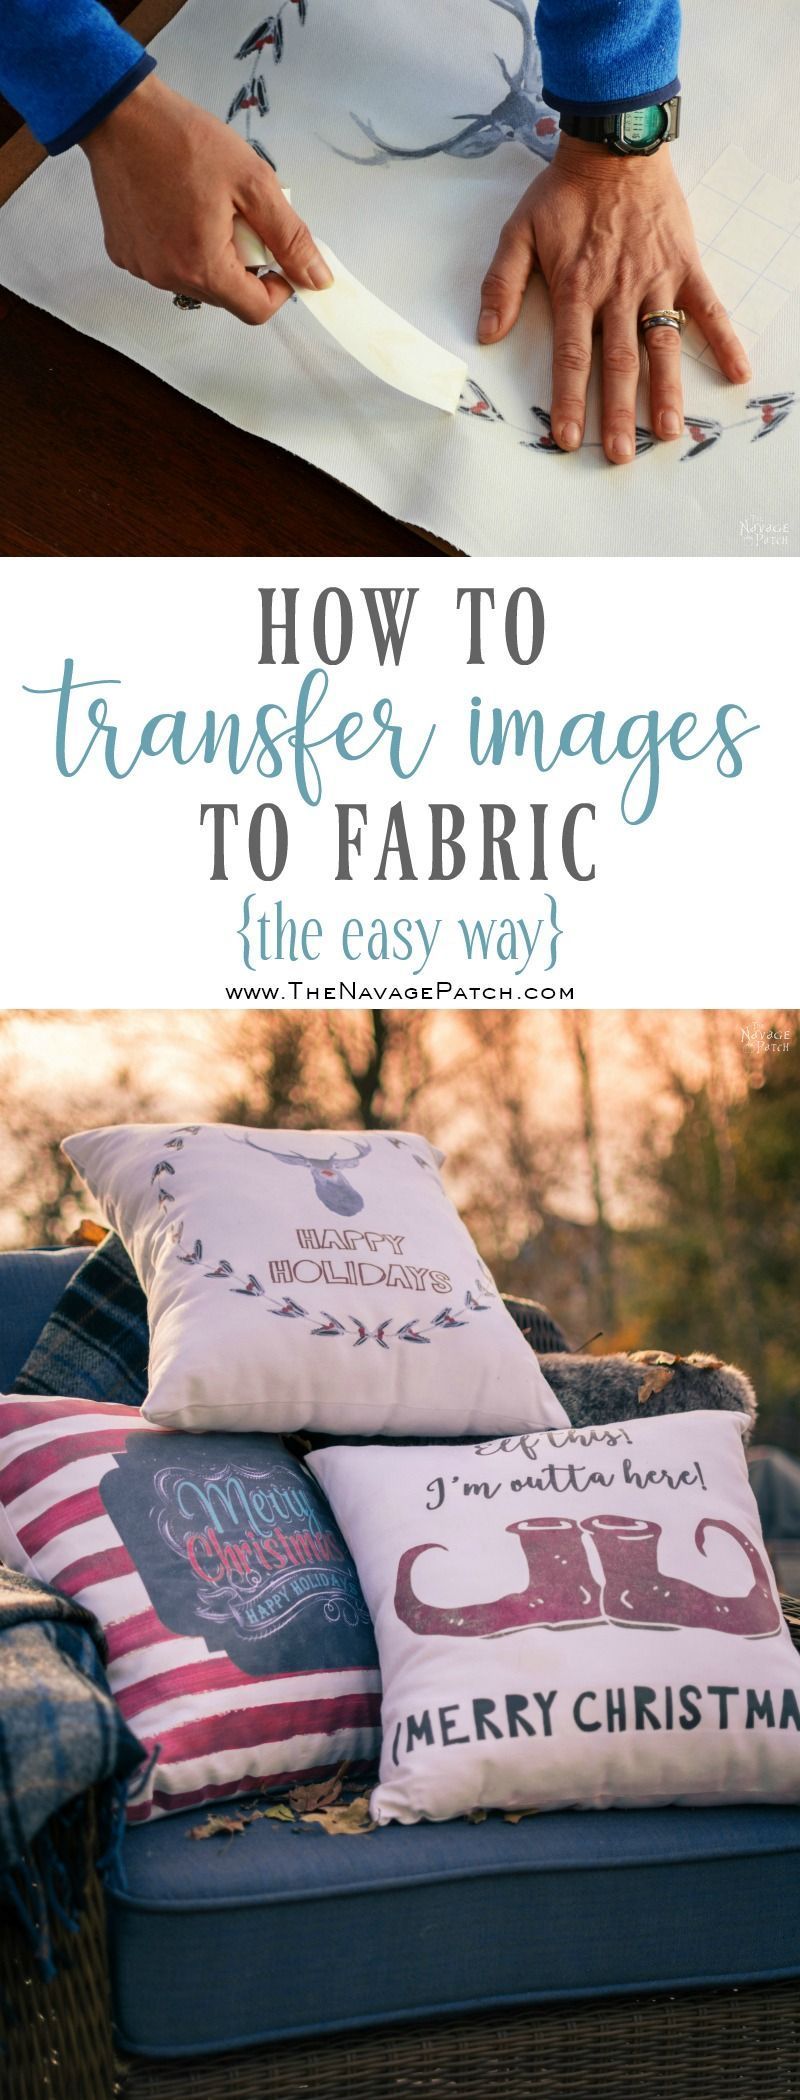 Image Transfer to Fabric - The Quick & Easy Way! - The Navage Patch - Image Transfer to Fabric - The Quick & Easy Way! - The Navage Patch -   diy Easy step by step